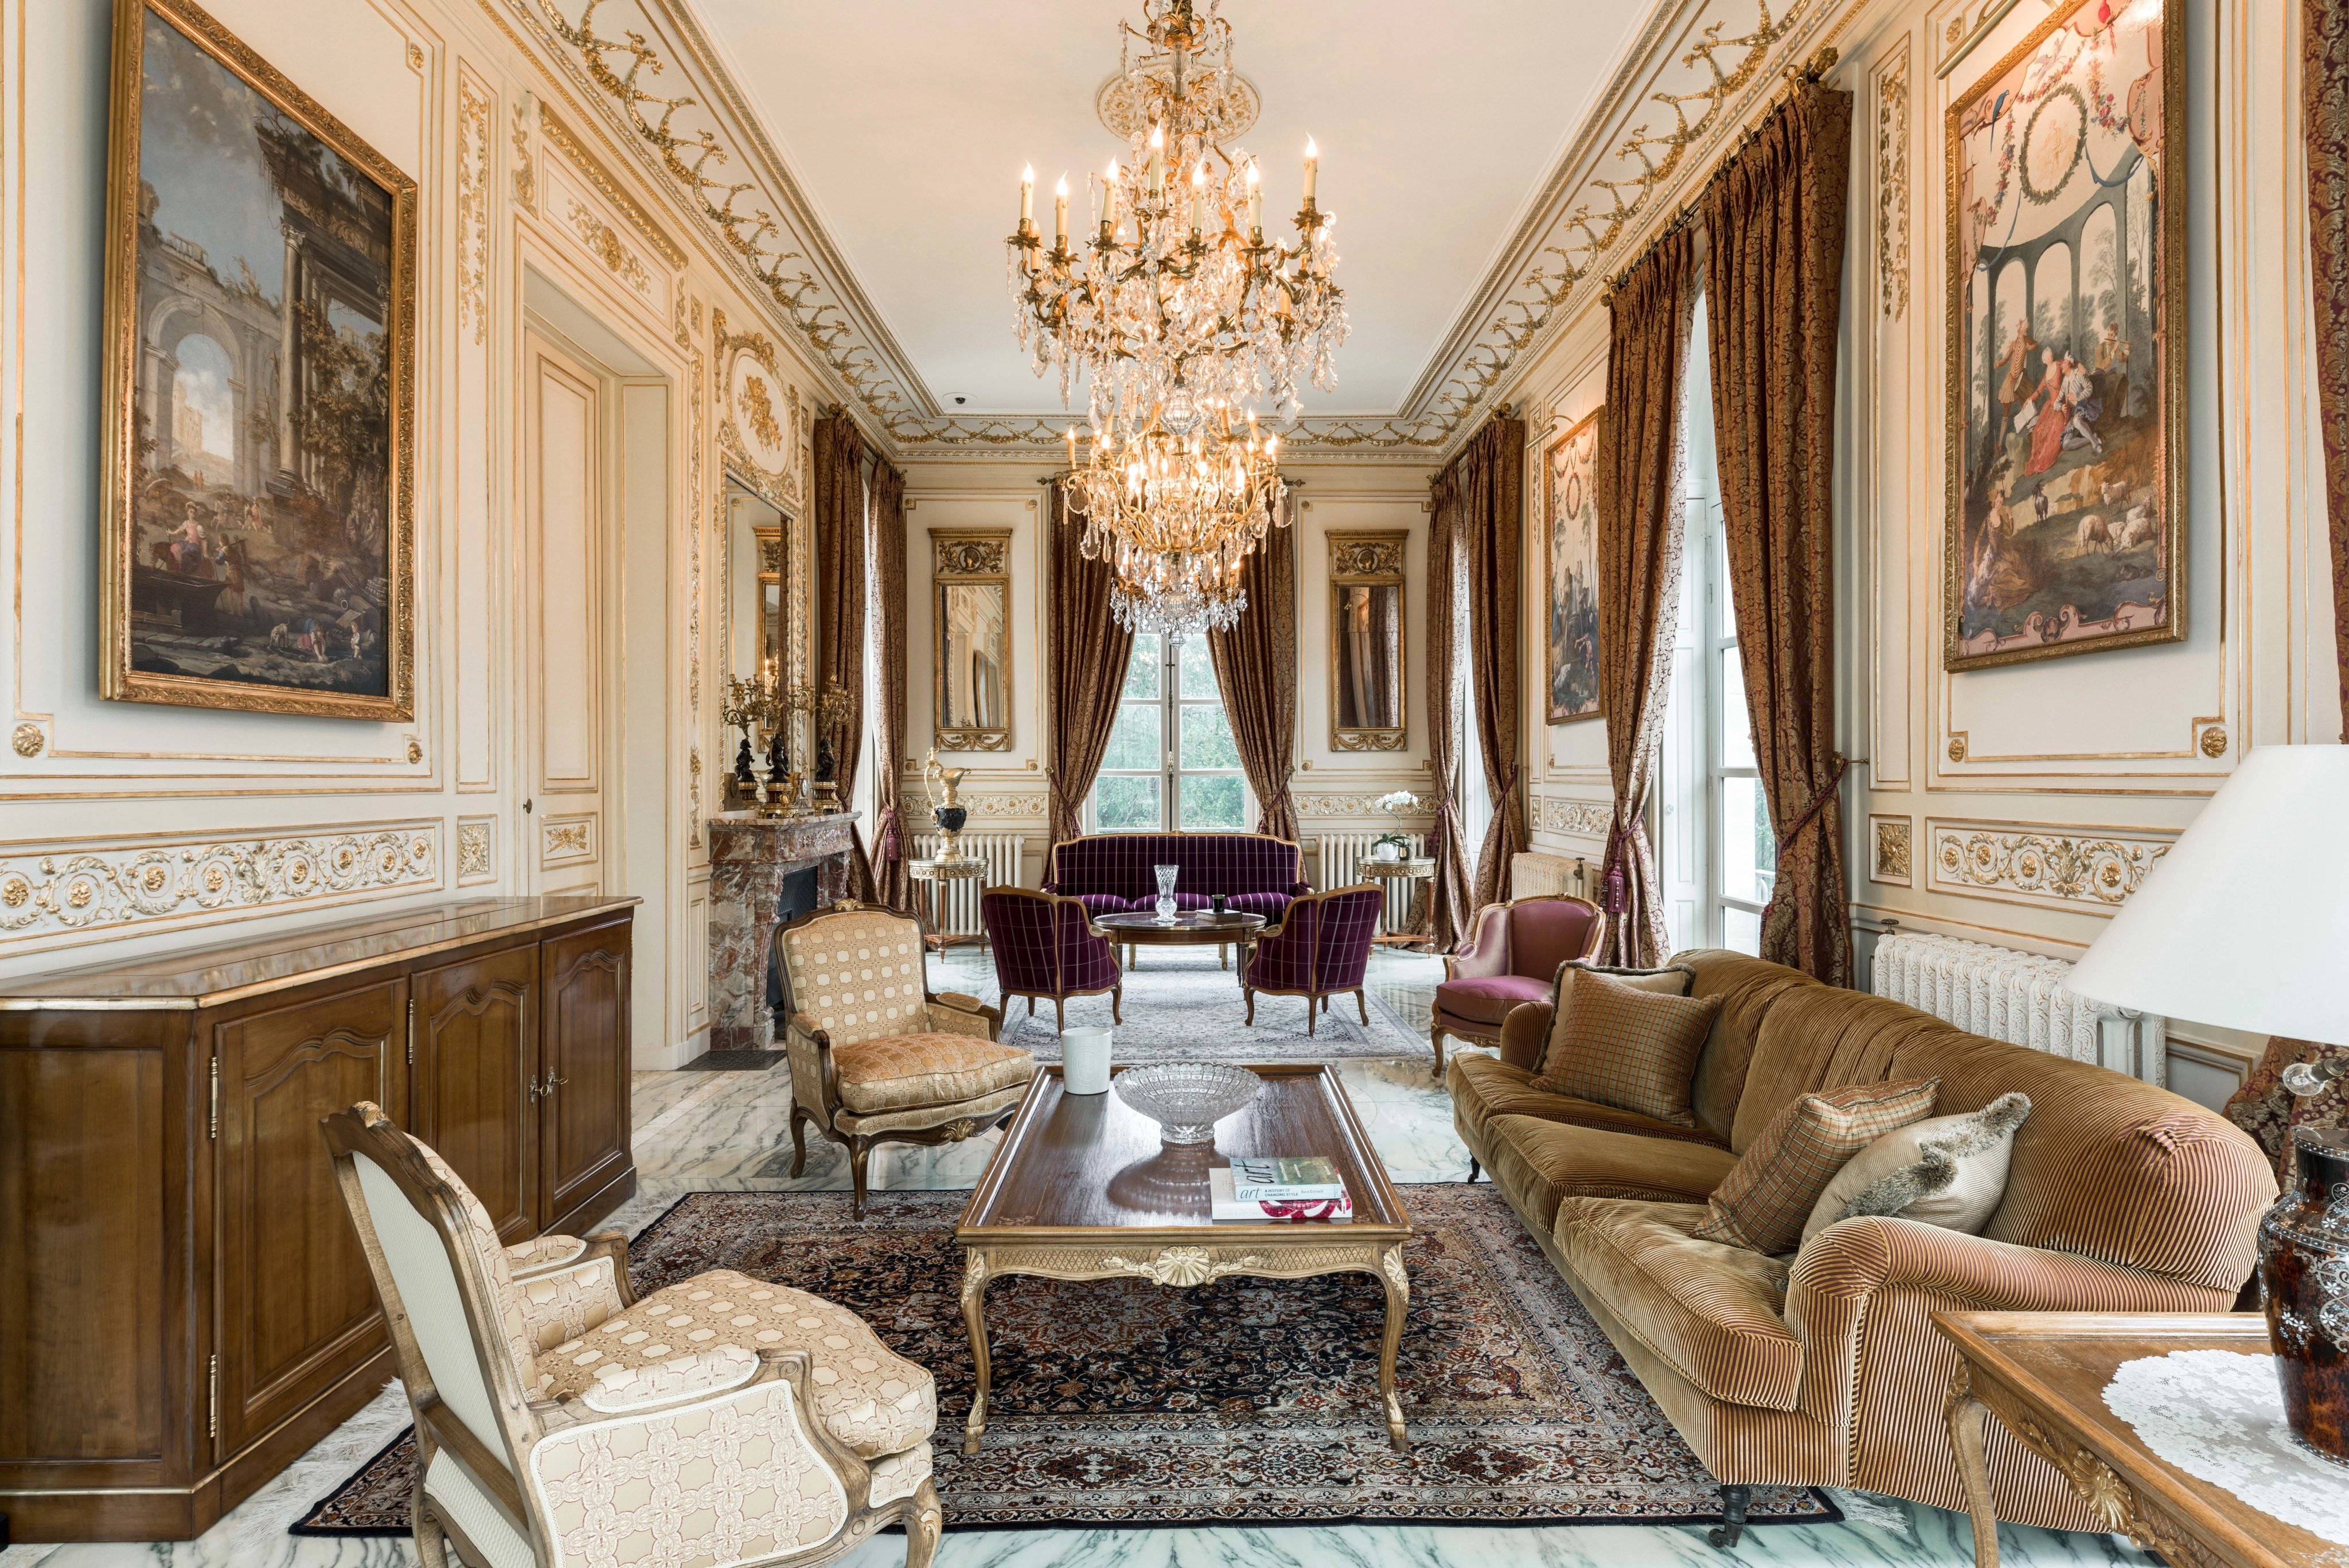 A sublime Palais inspired by Grand Trianon Palace, 20 min from Paris_1562